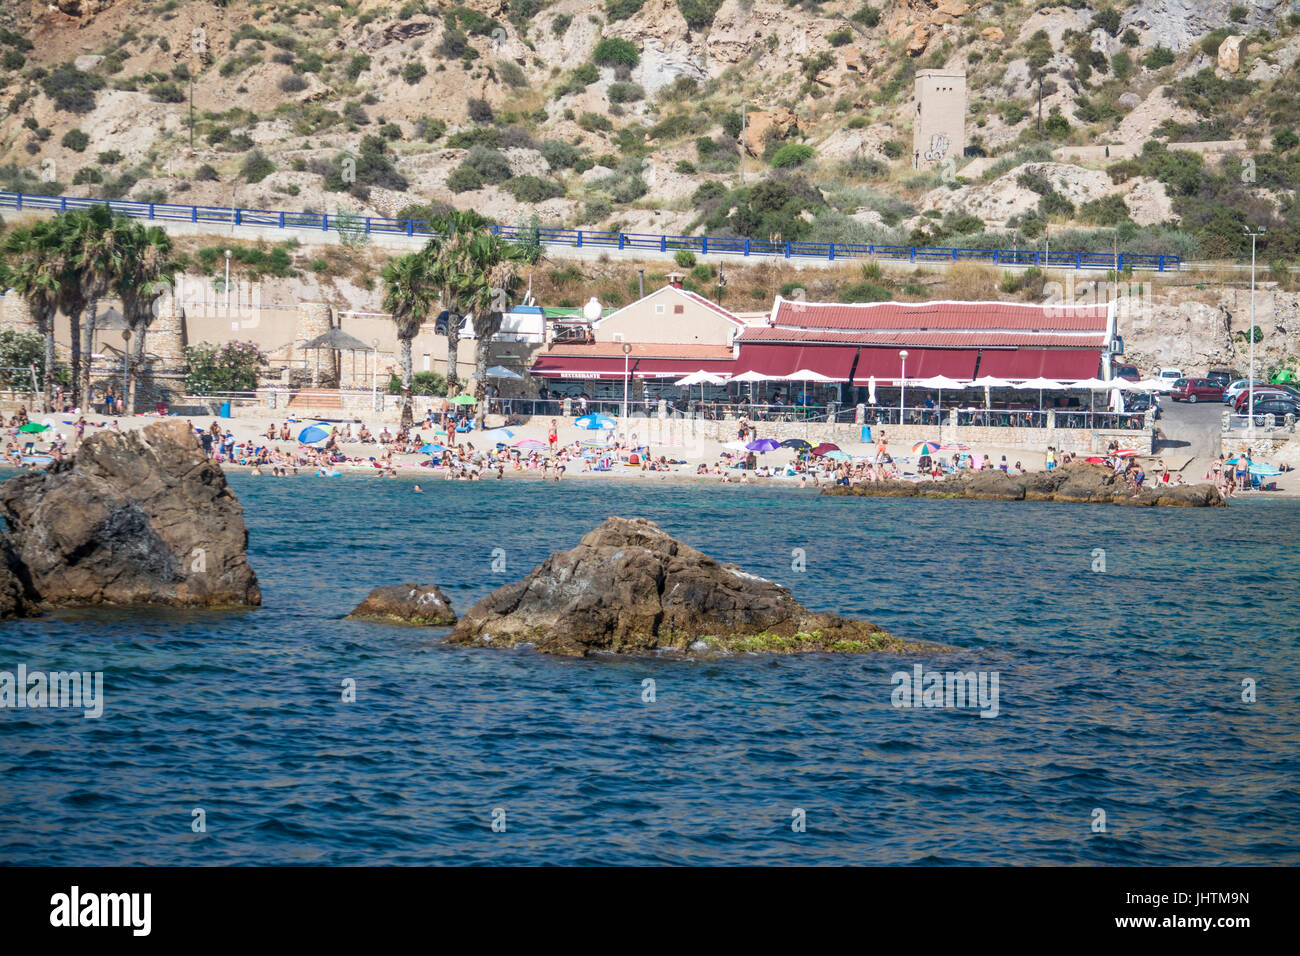 Sunbathers on the beach in front of the restaurant at Cala Cortina near Cartagena in Murcia Spain Stock Photo